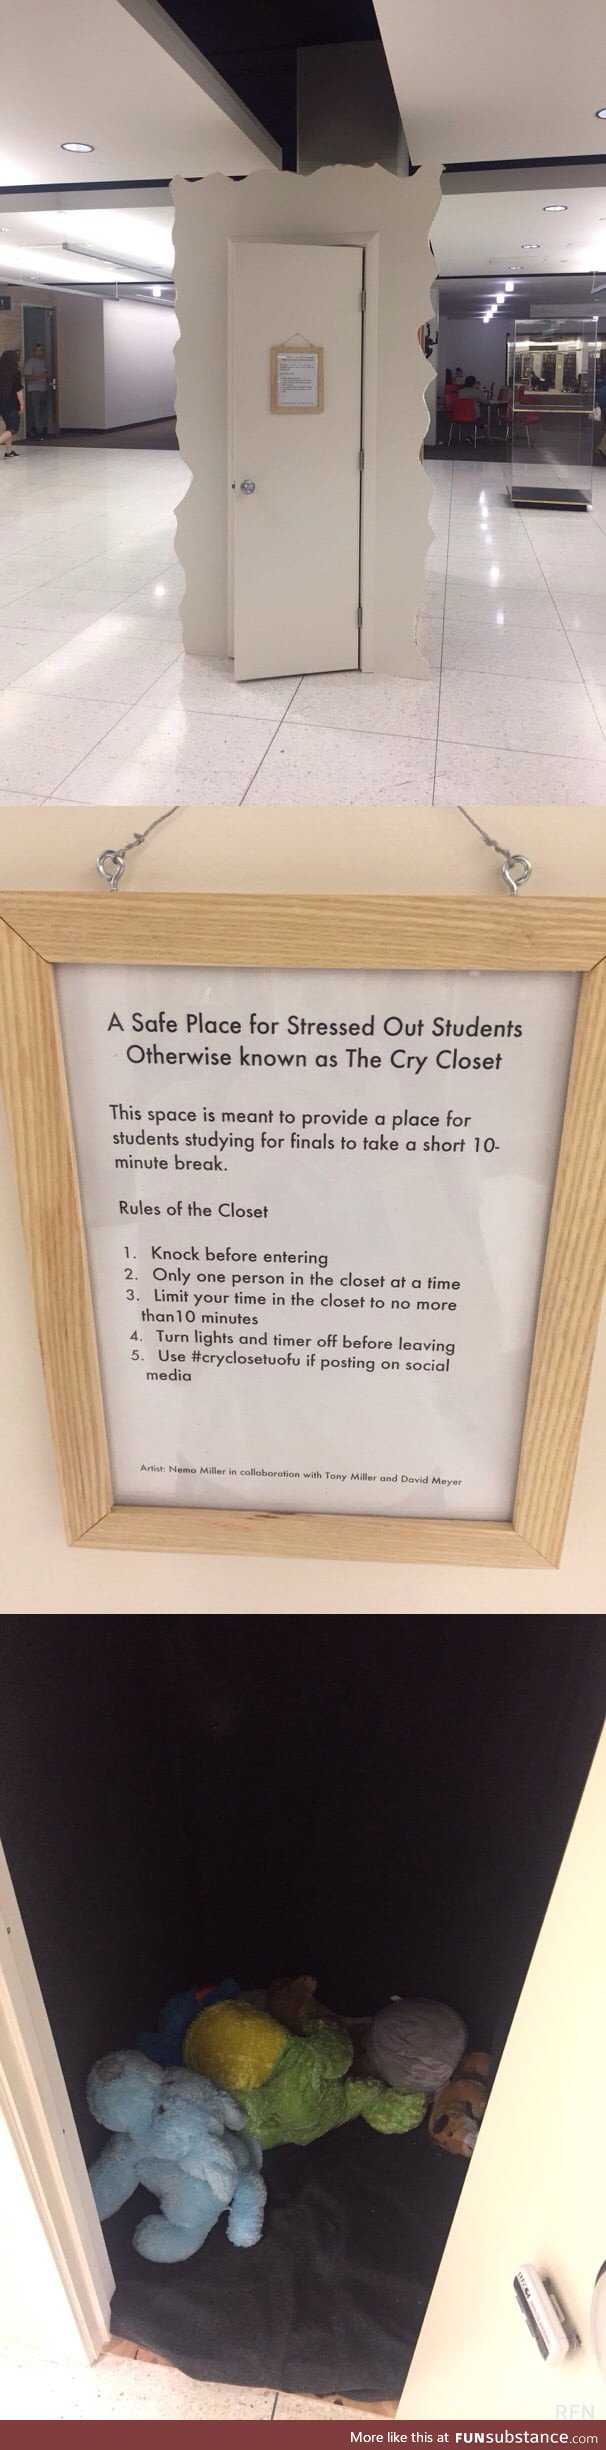 This school installed a cry closet in the library